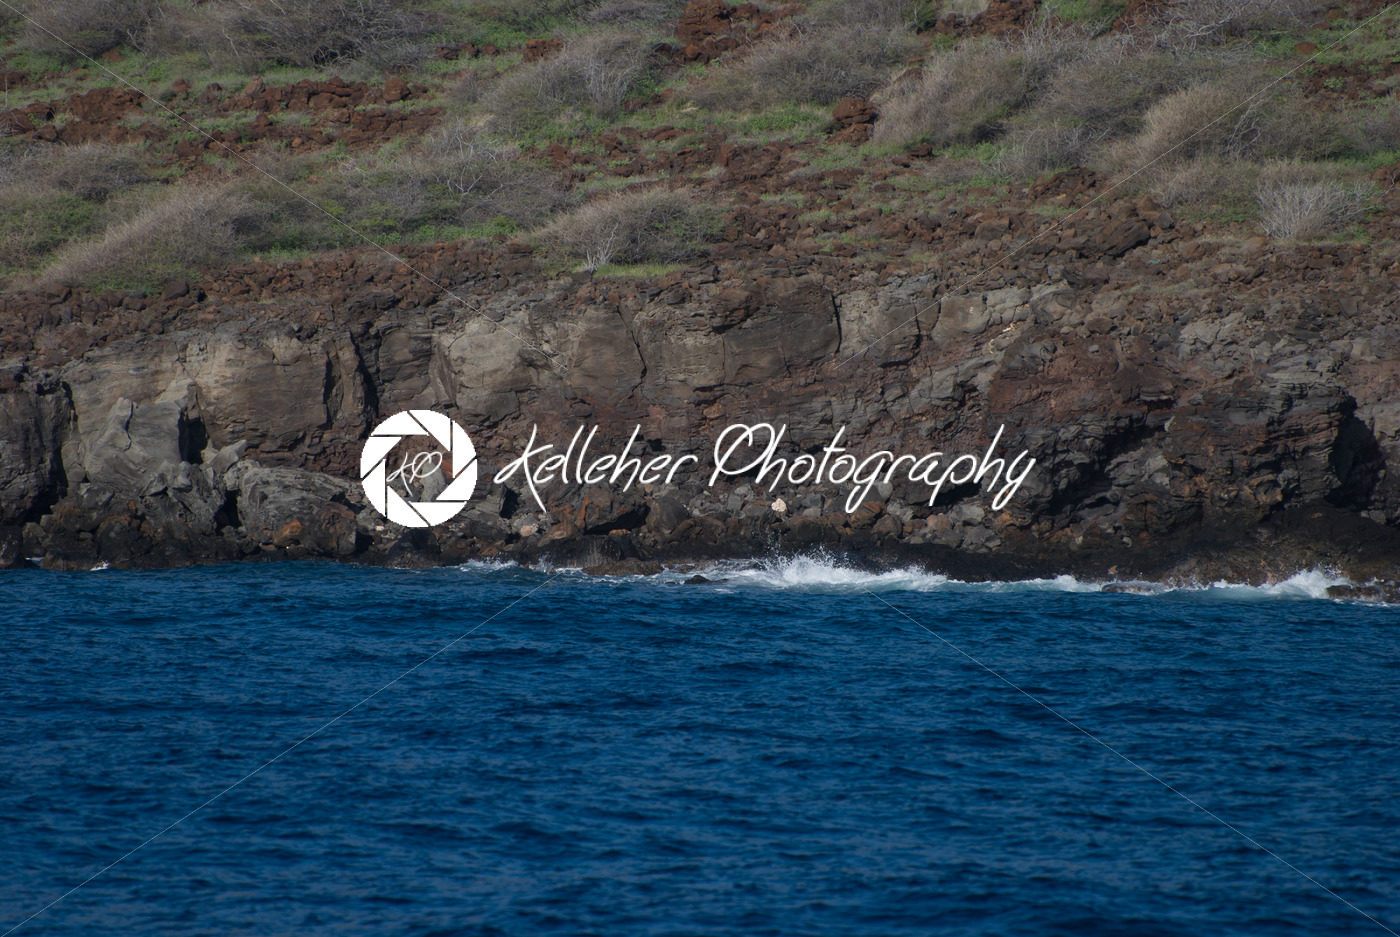 Tropical View, Lanai Lookout, Hawaii - Kelleher Photography Store